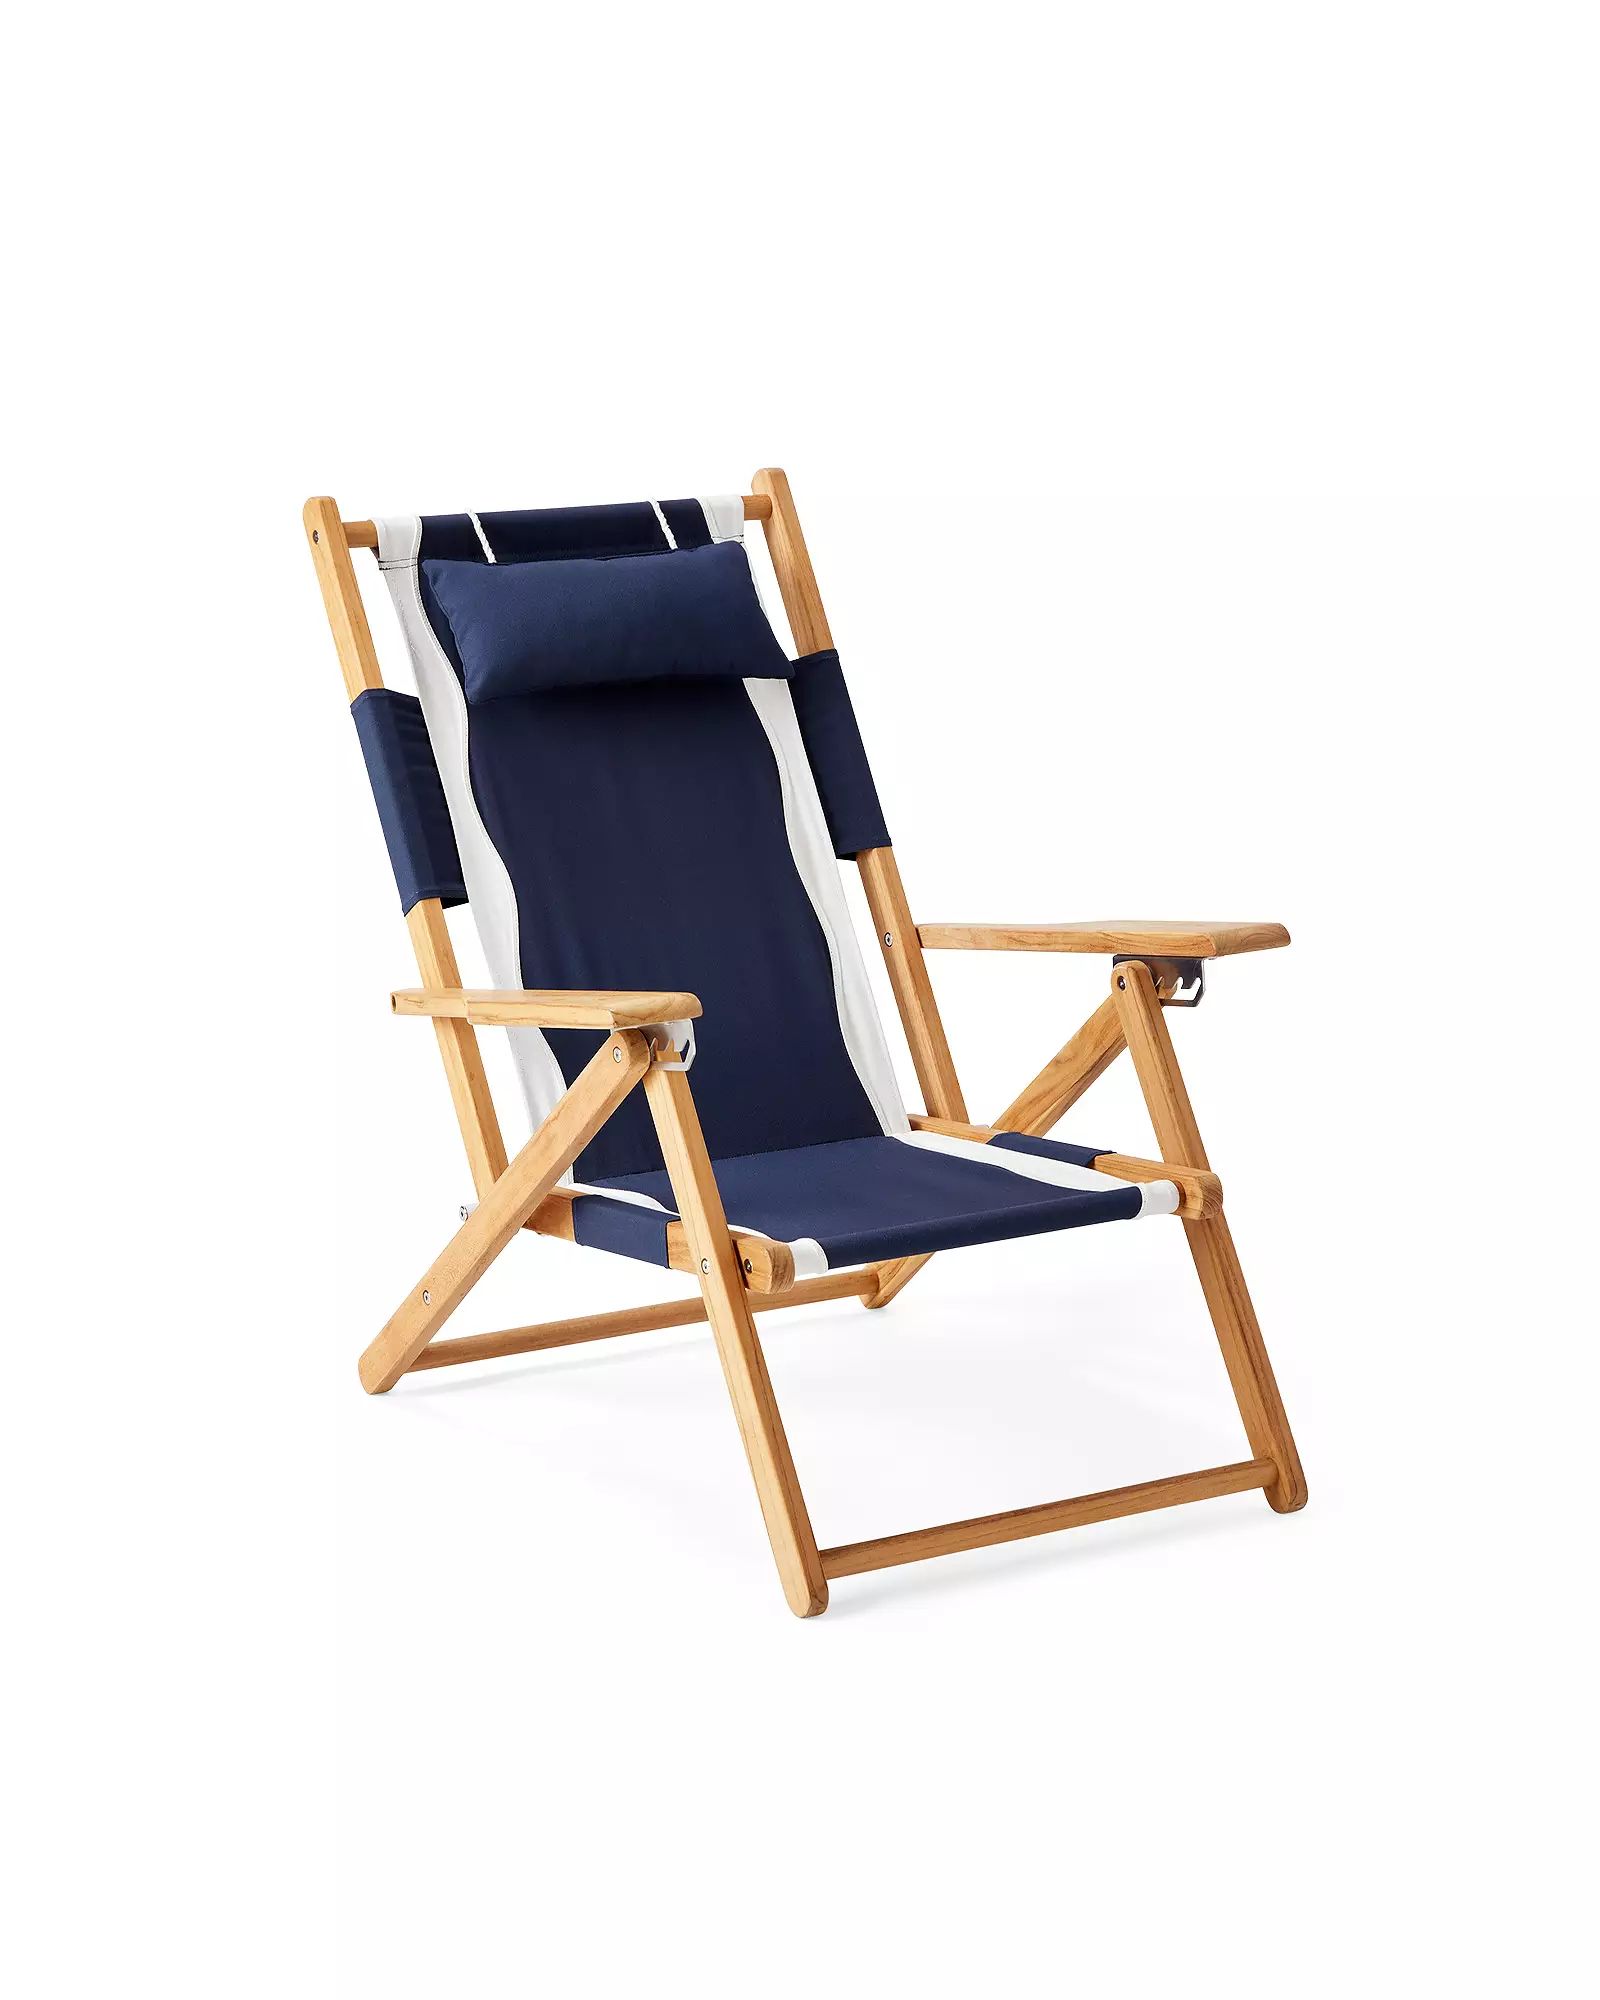 Teak Beach Chair | Serena and Lily